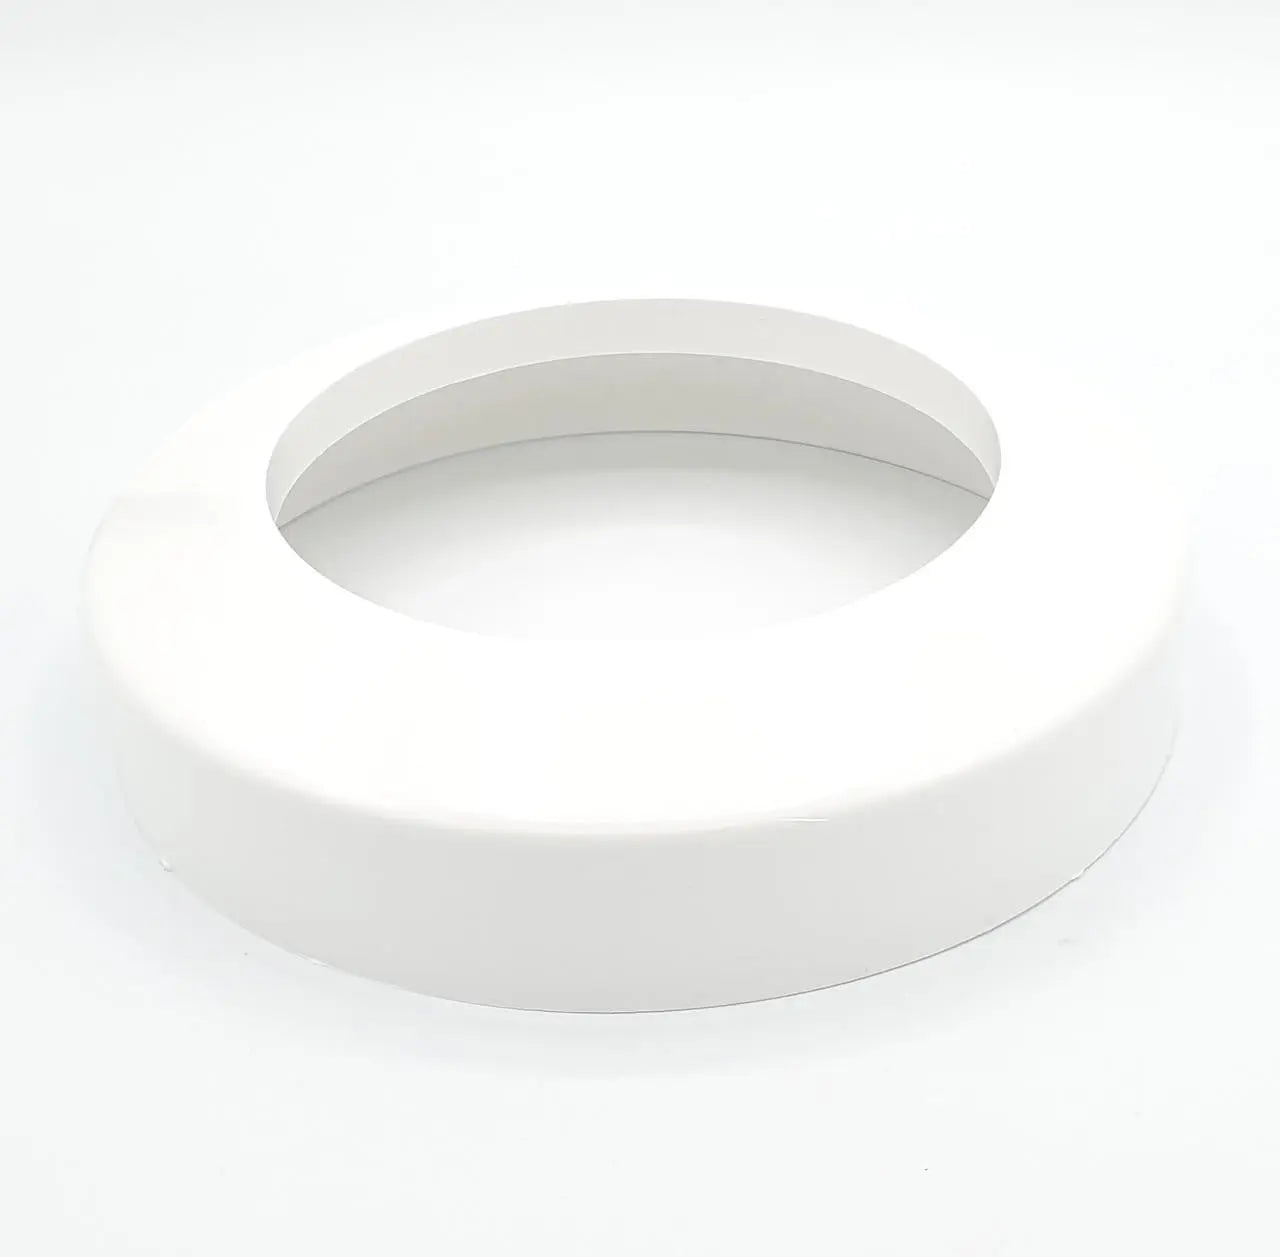 110mm Soil Toilet Pipe Cover Collar White Wall Cover - Toilet Waste Pipe